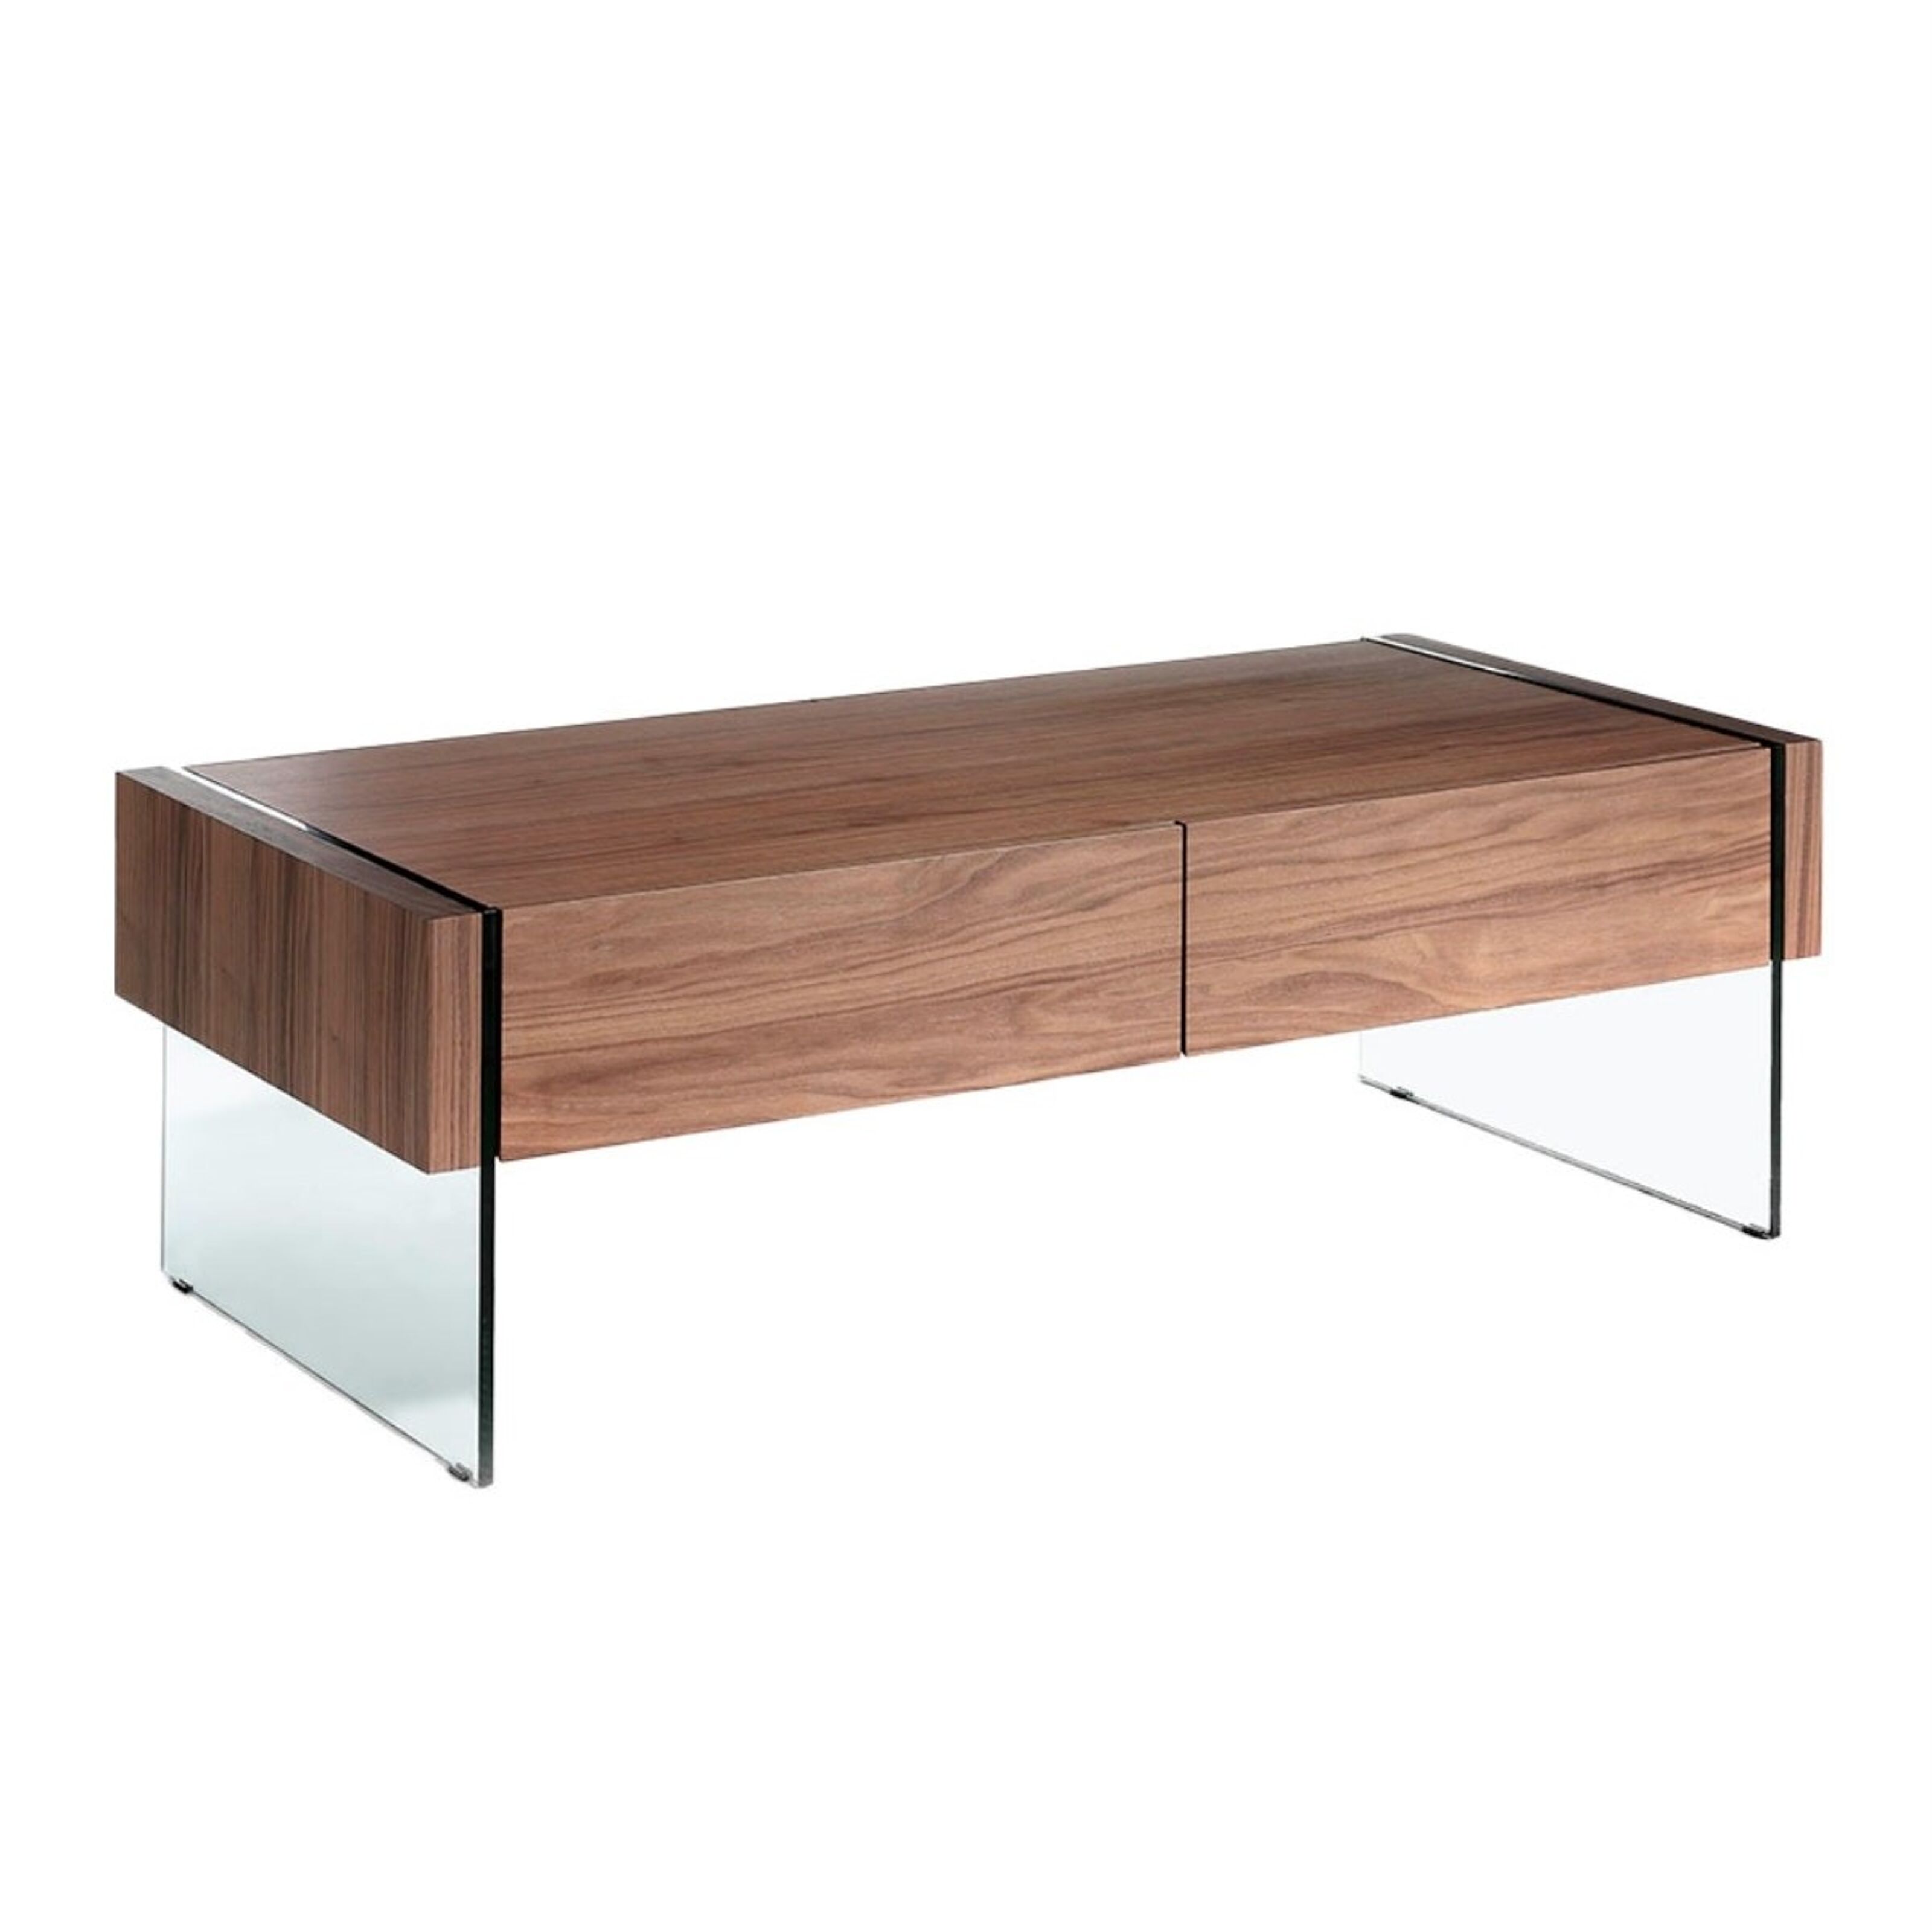 Buy wholesale Walnut veneered wood center table with tempered glass sides  and drawers, model 2050